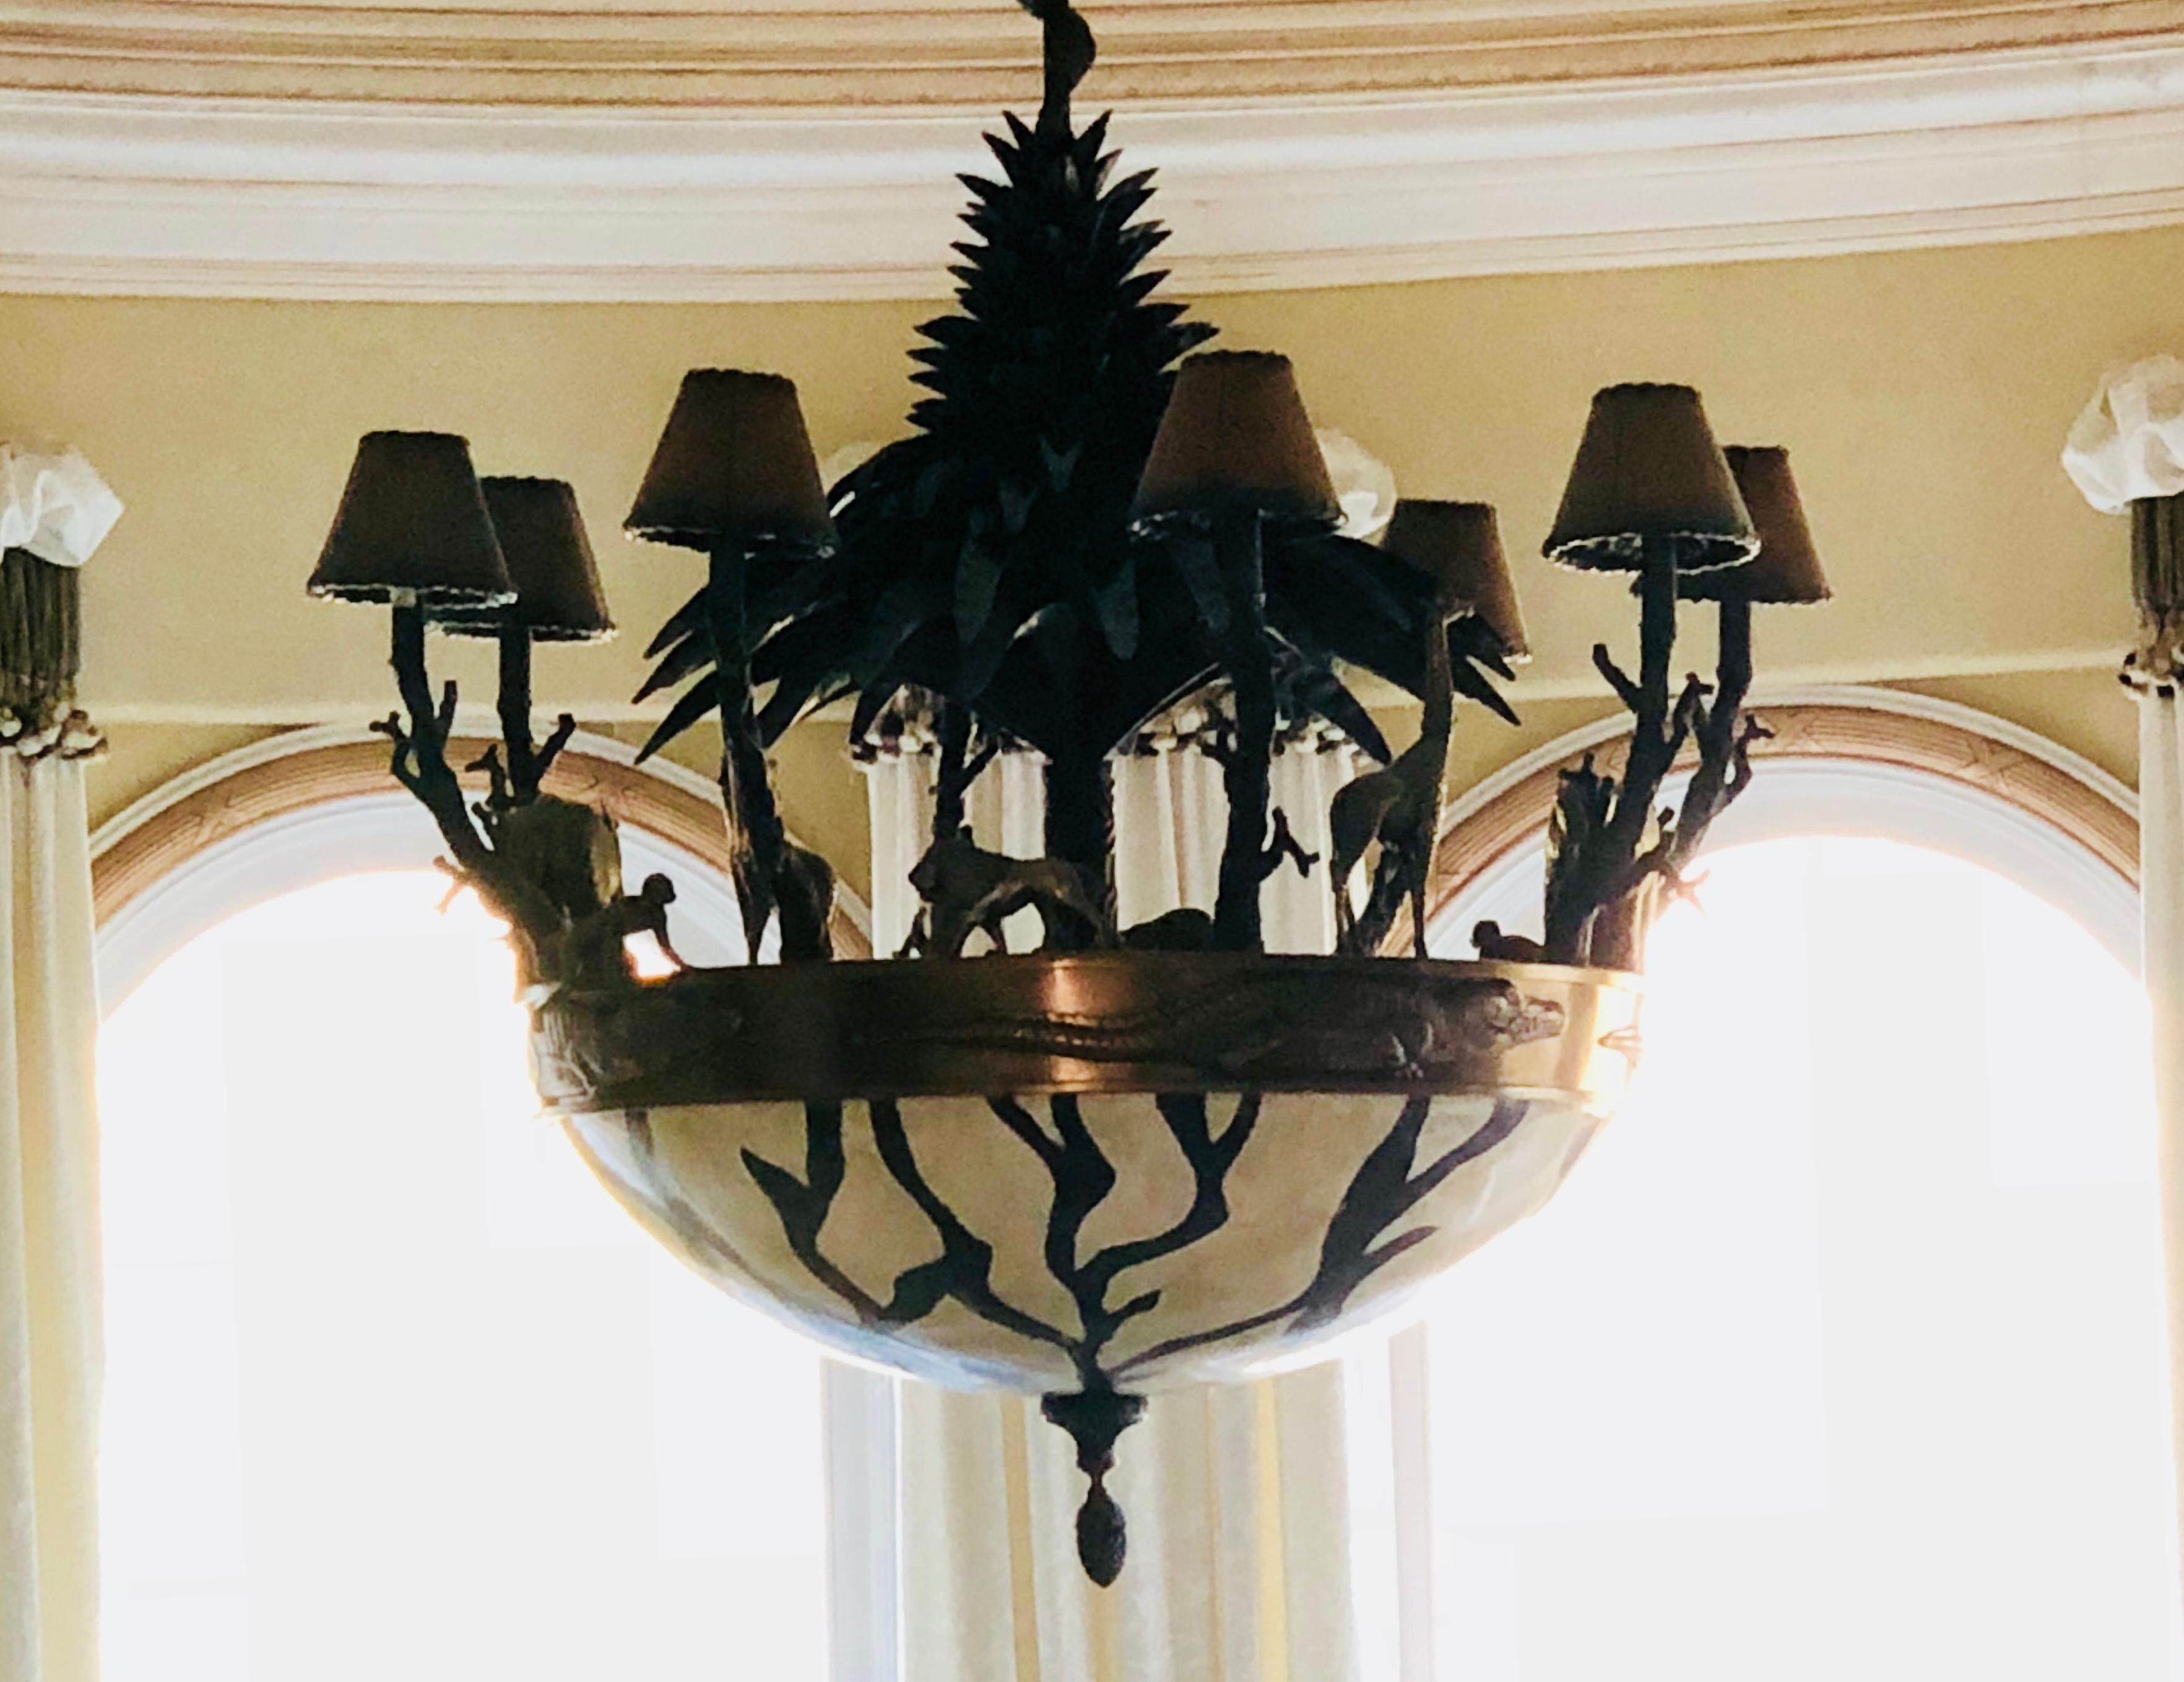 Magnificent, large scale, handmade artisan, estate chandelier features a bold zebra patterned, crackle finish, large round translucent domed bowl. Chandelier frame is a patinated bronze and verdigris brass. It is topped with a repeating motif of